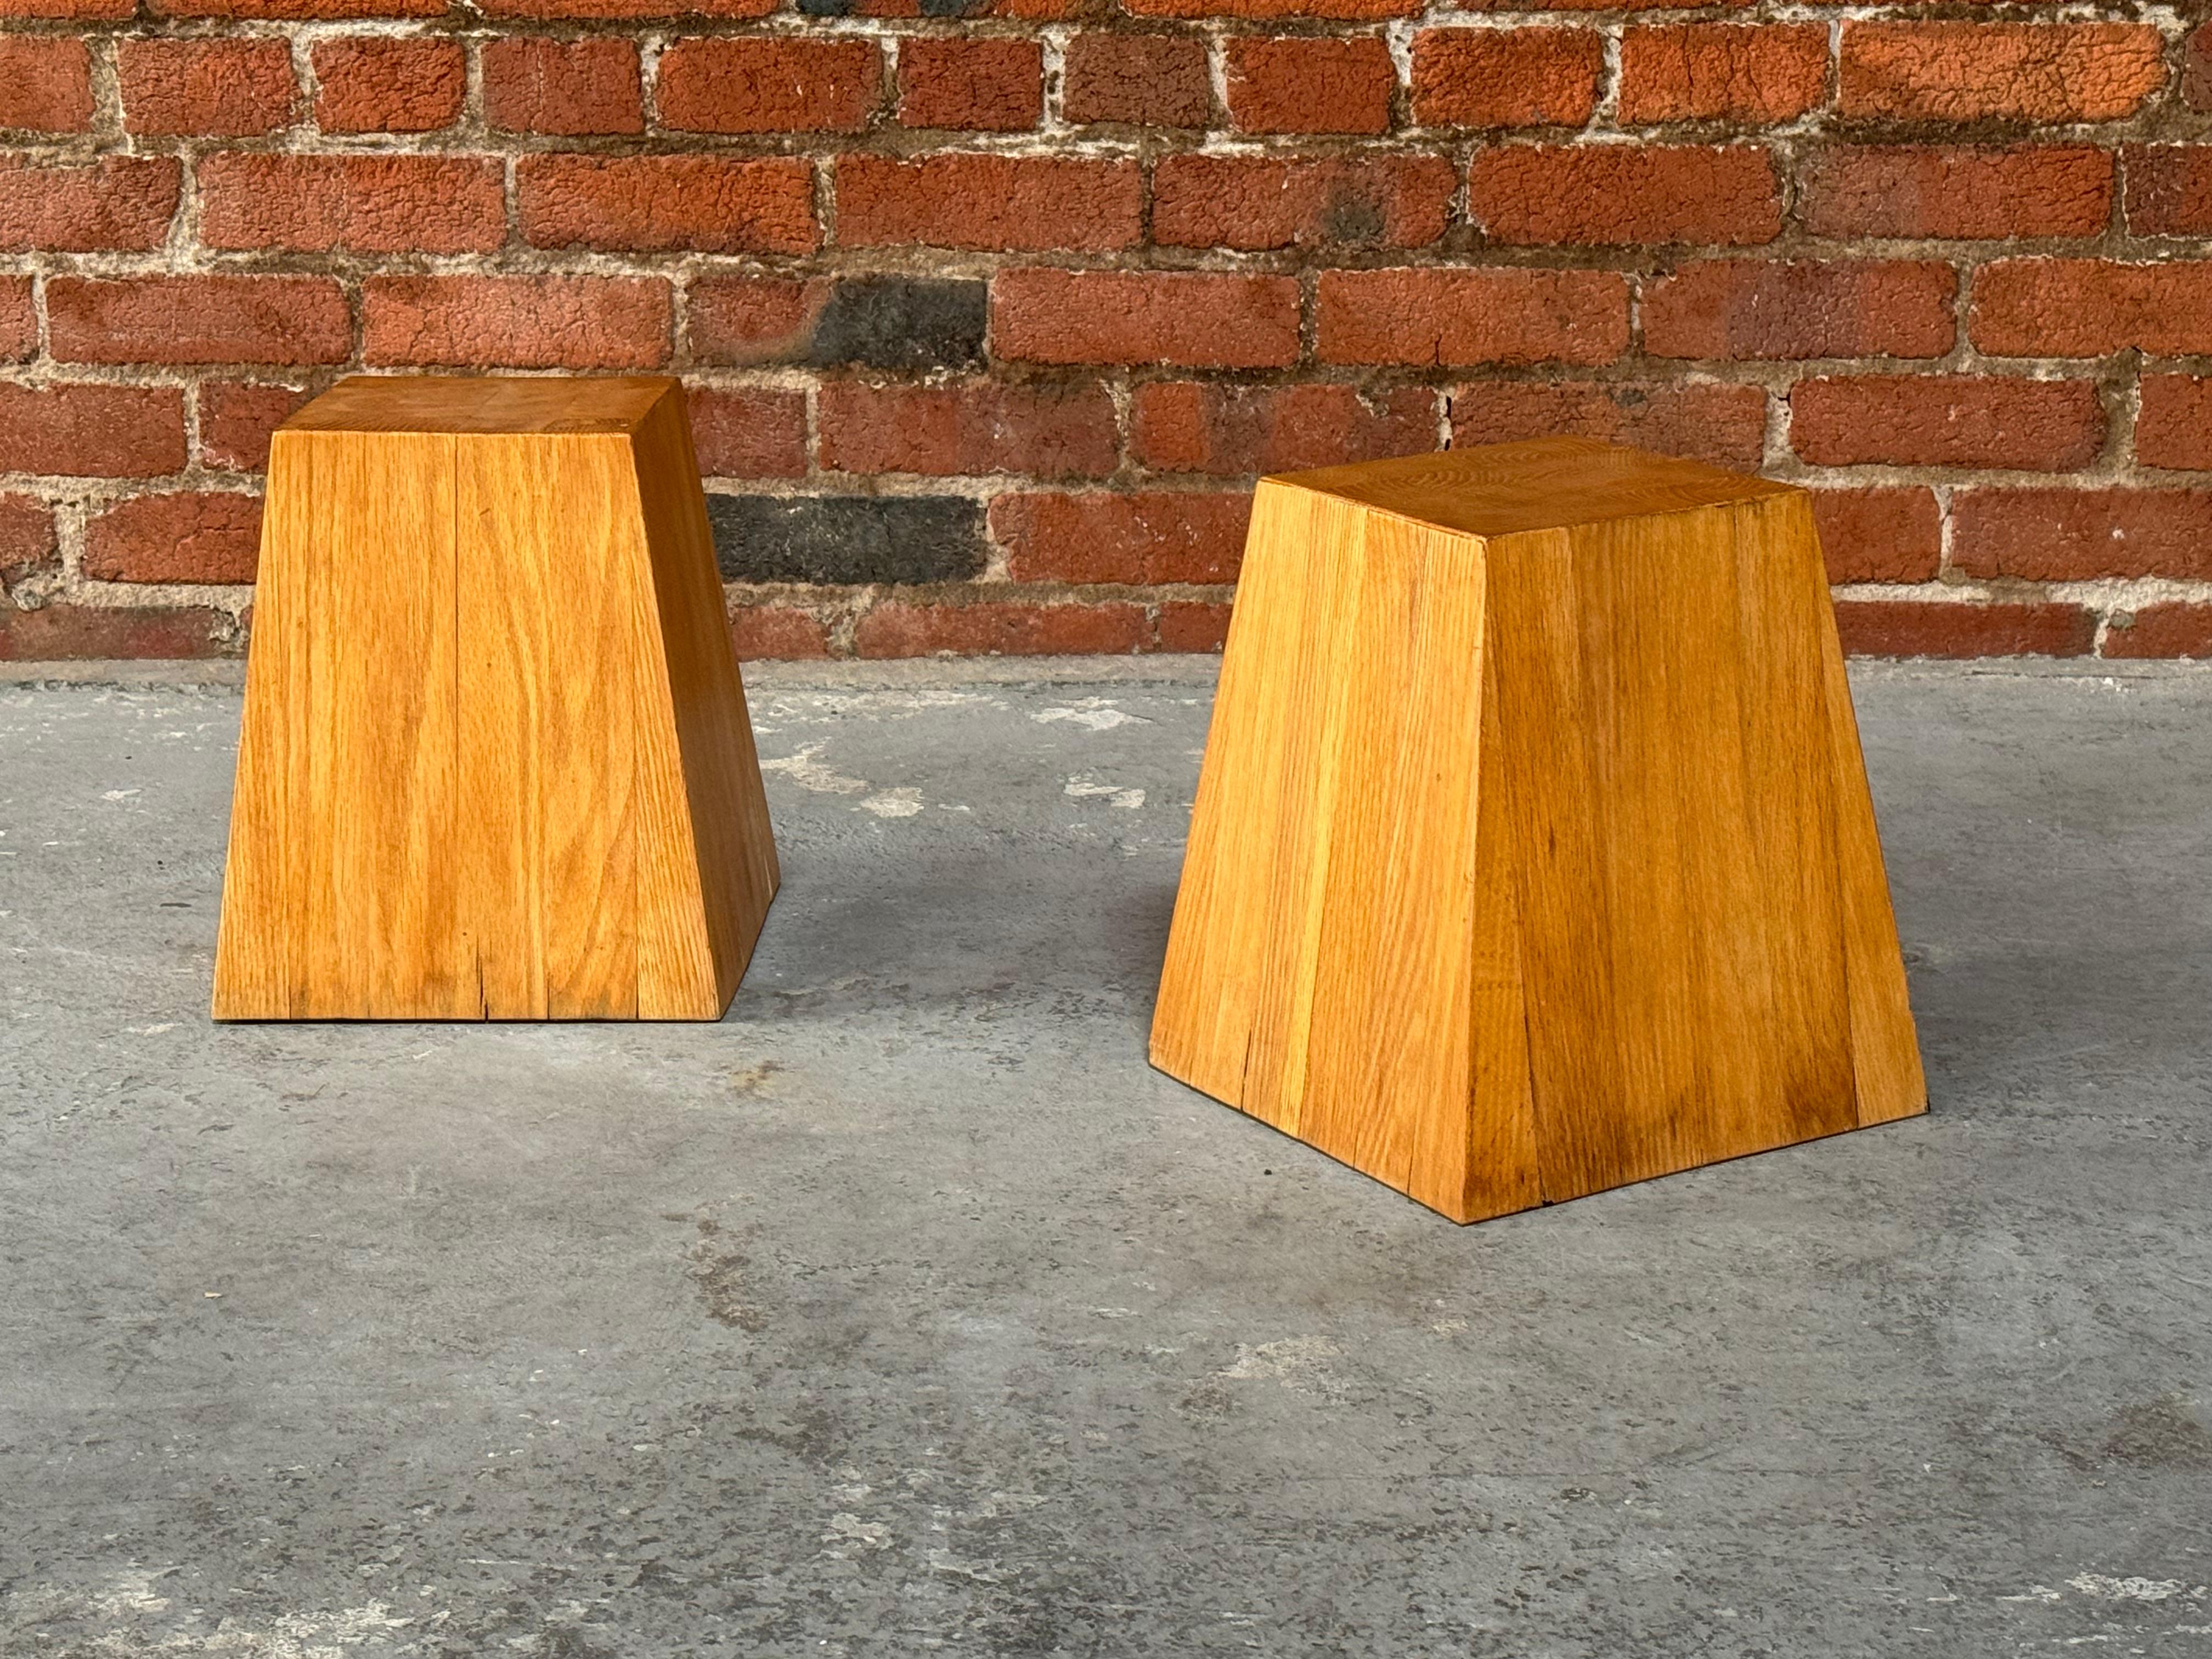 Chunky solid elm small side tables or pedestals, a wonderful architectural form that can be used for an multitude of uses in the interior, these were directly imported from Denmark.